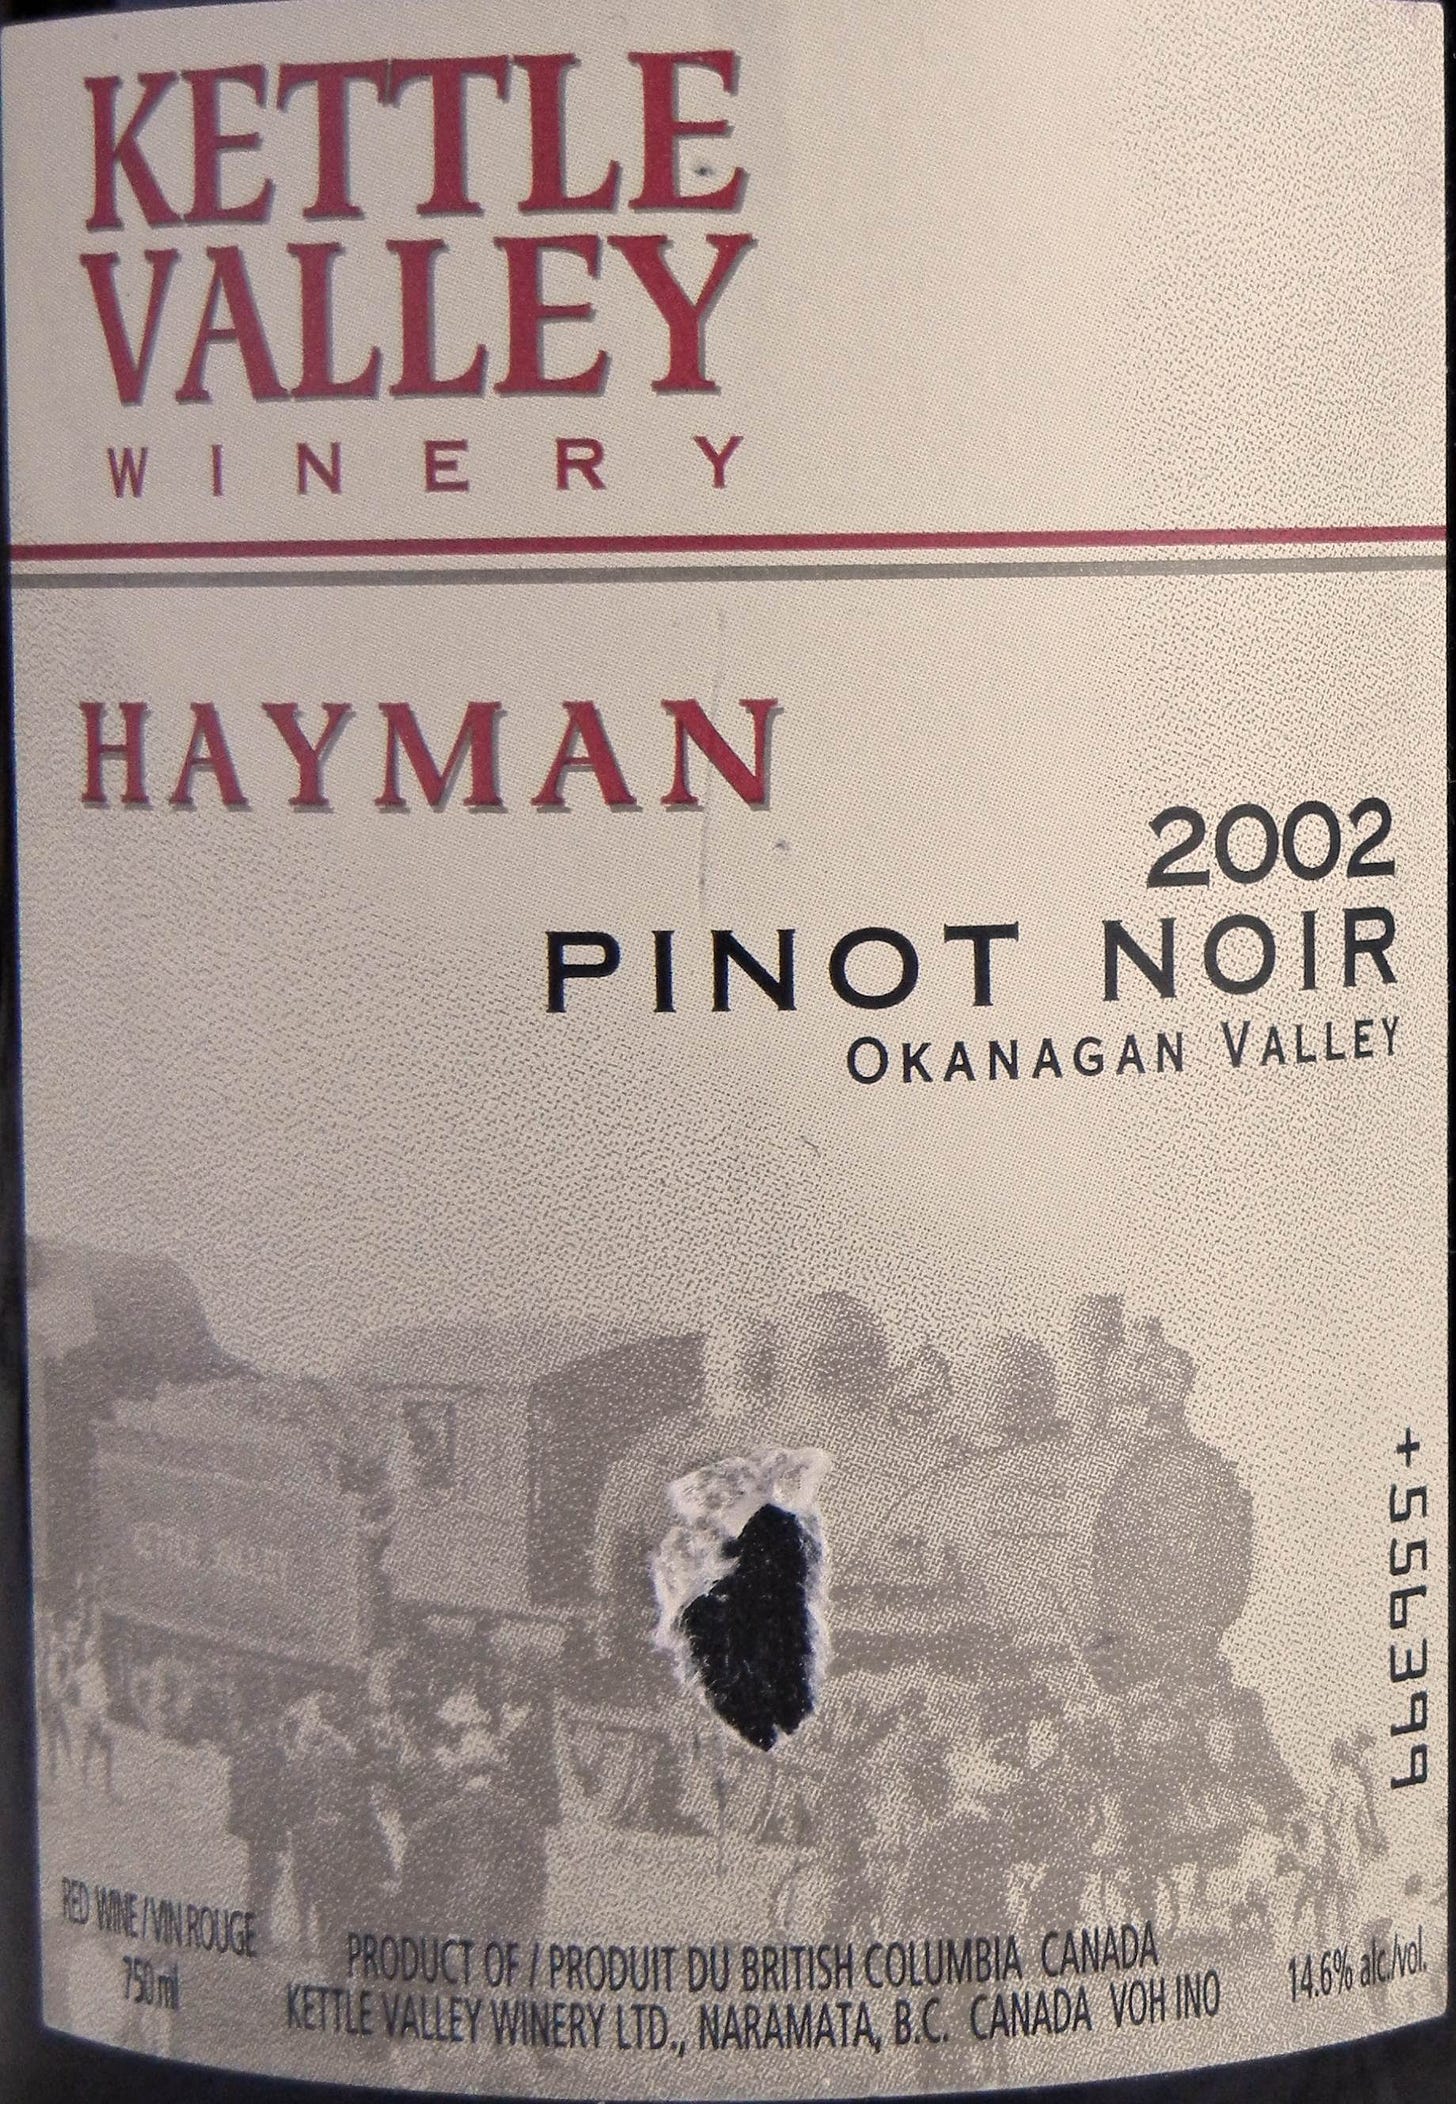 Kettle Valley Hayman Pinot Noir 2002 Label - BC Tasting Review 25